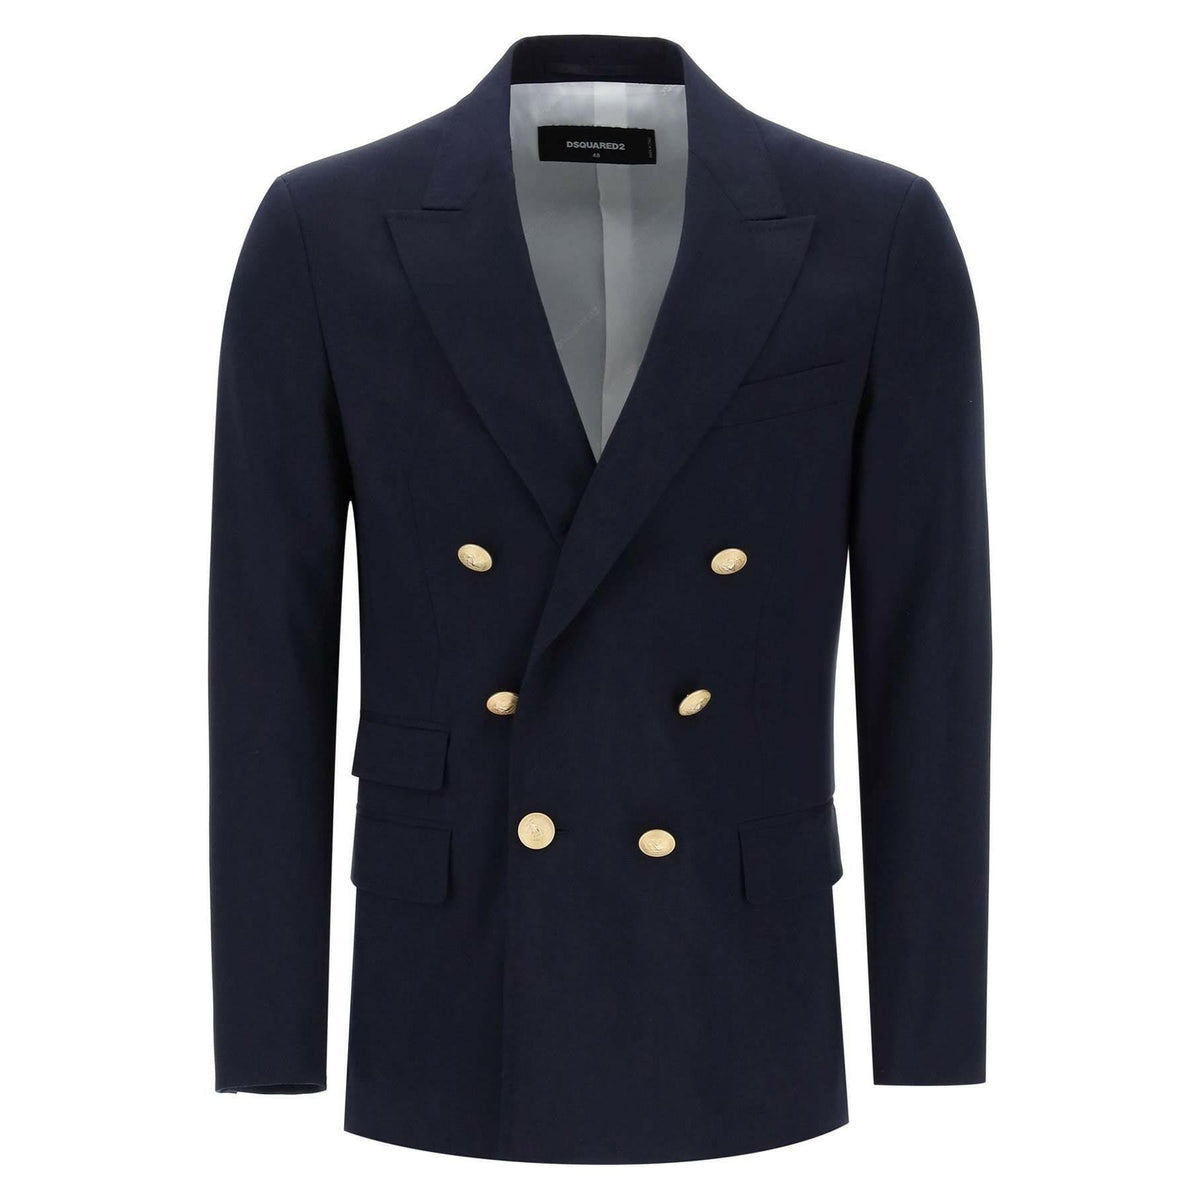 DSQUARED2 - Navy Blue Wool Palm Beach Double-Breasted Jacket With Gold Buttons - JOHN JULIA